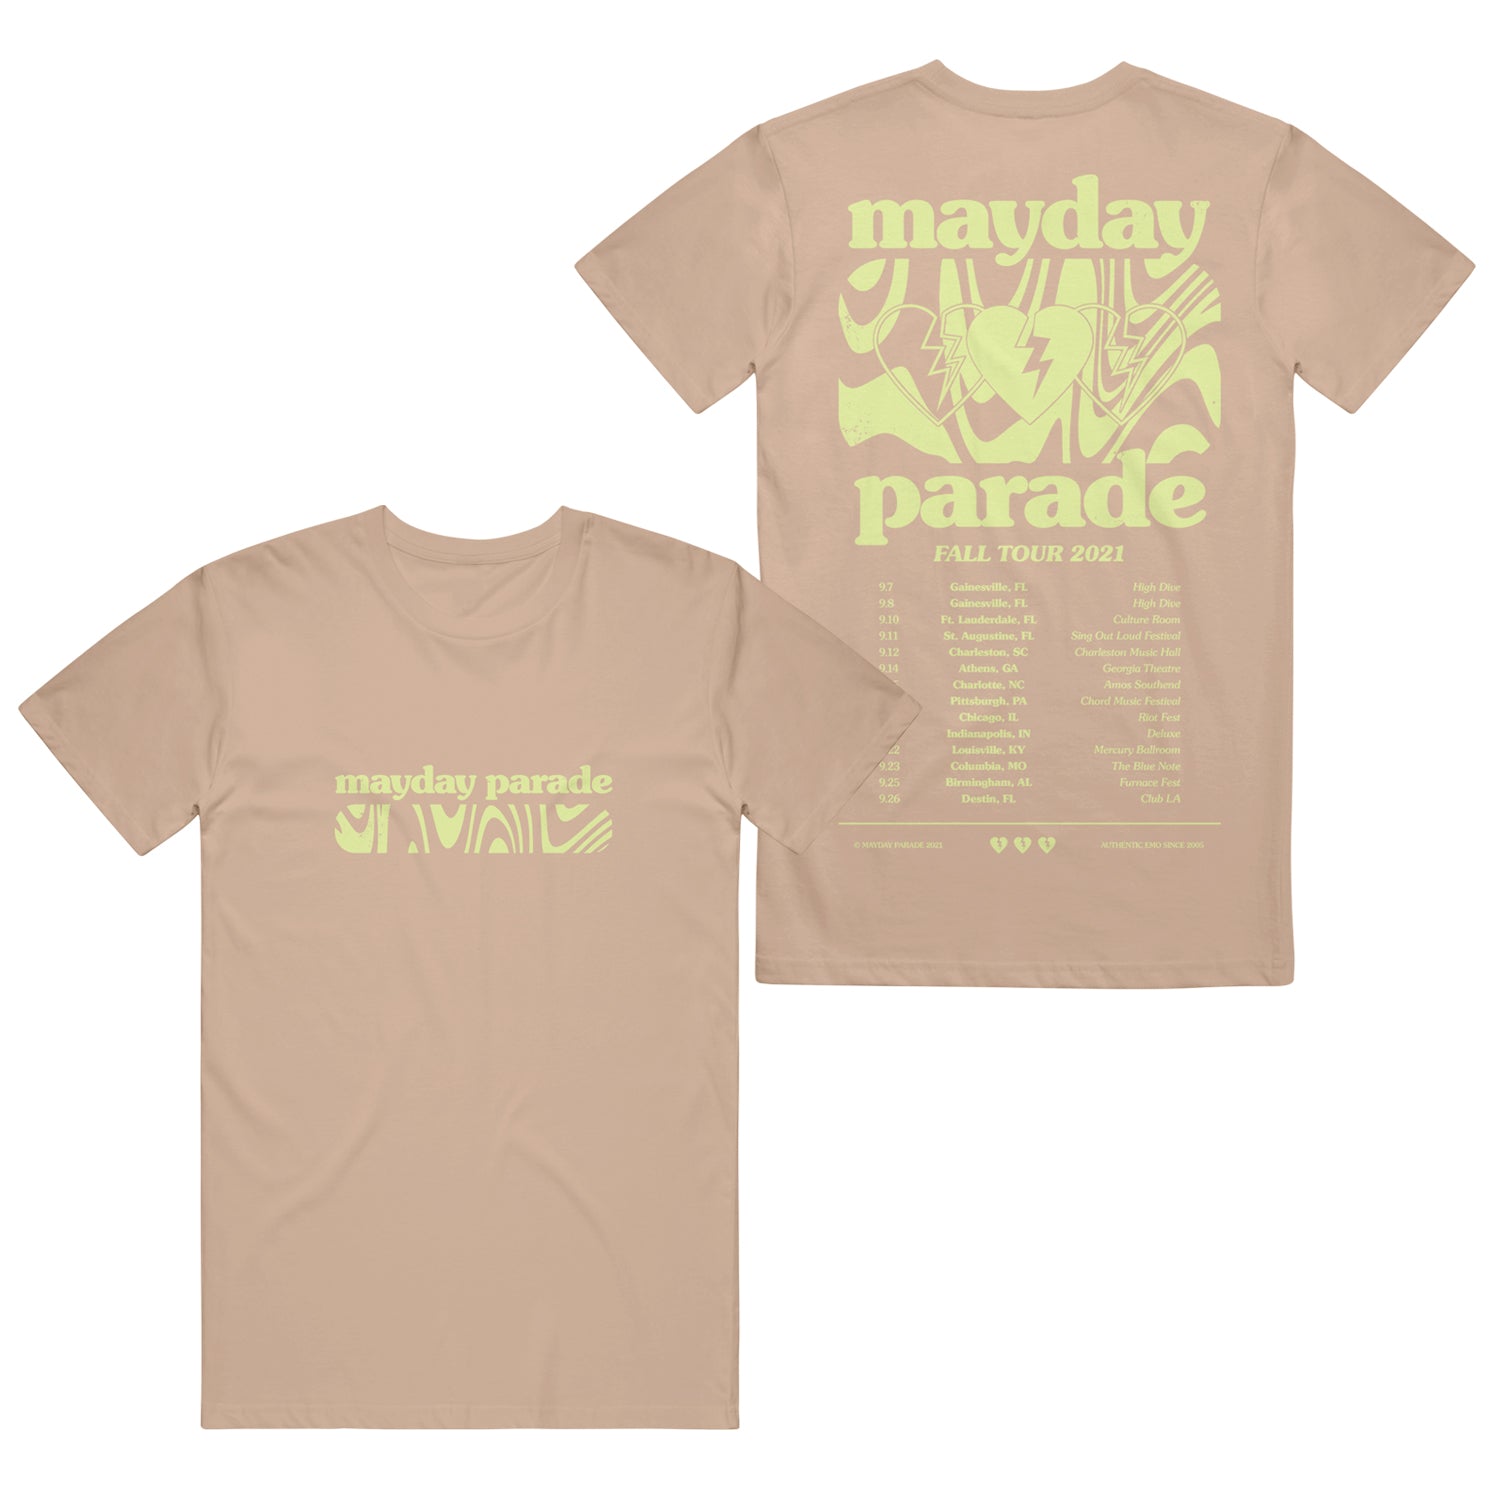 image of the front and back of a tan tee shirt on a white background. front is on the left and has a chest print in lime green across the chest that says mayday parade with squiggles below. back is on the right with full print in green that says mayday on top, squiggles and broken heart below, parade below that and then fall 2021 tour dates below, filling the back of the shirt.